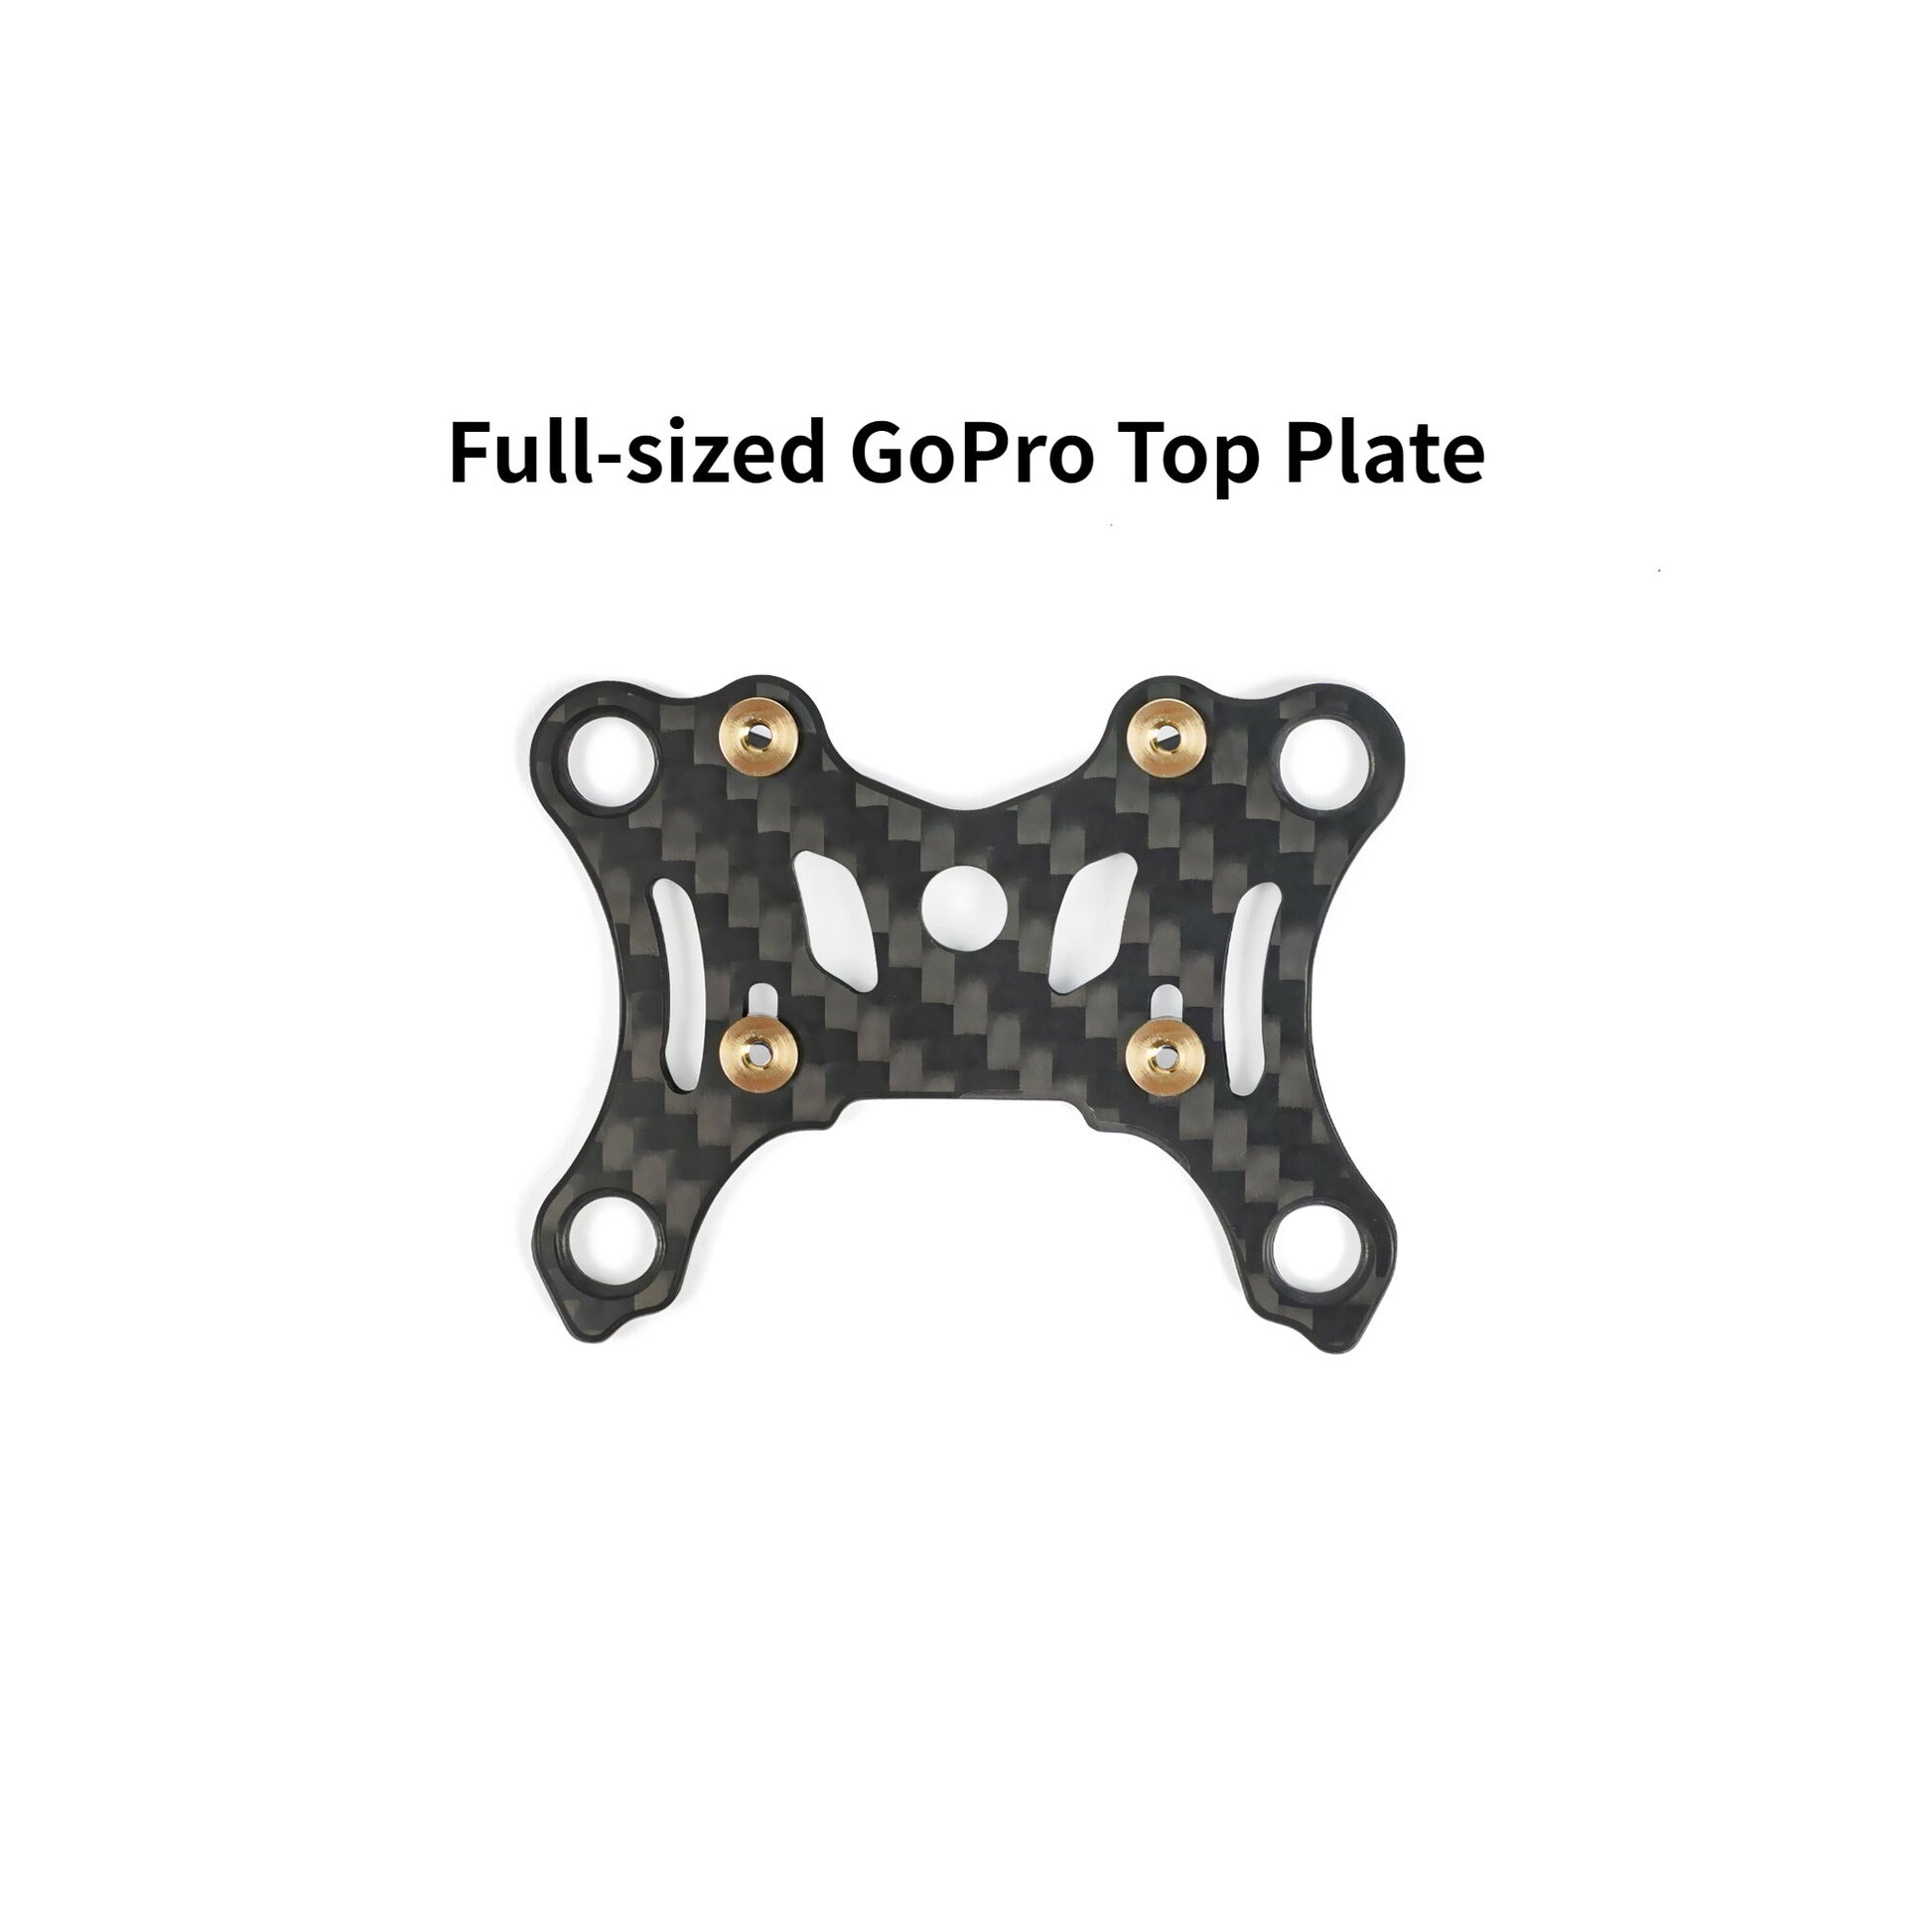 Full-sized GoPro Top Plate Ia